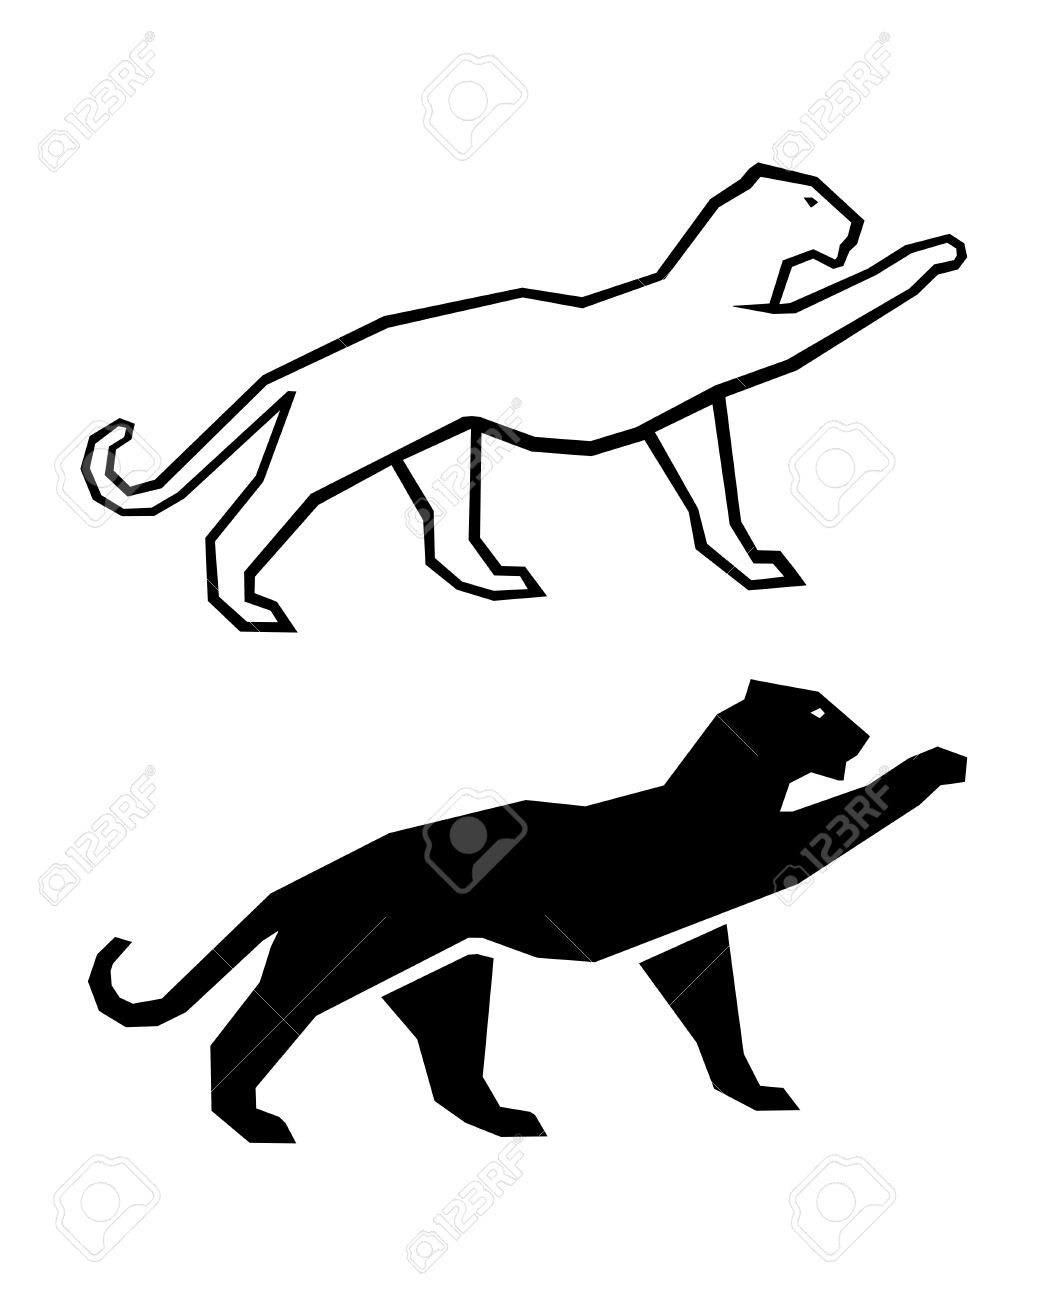 2,845 Black Panther Stock Vector Illustration And Royalty Free.